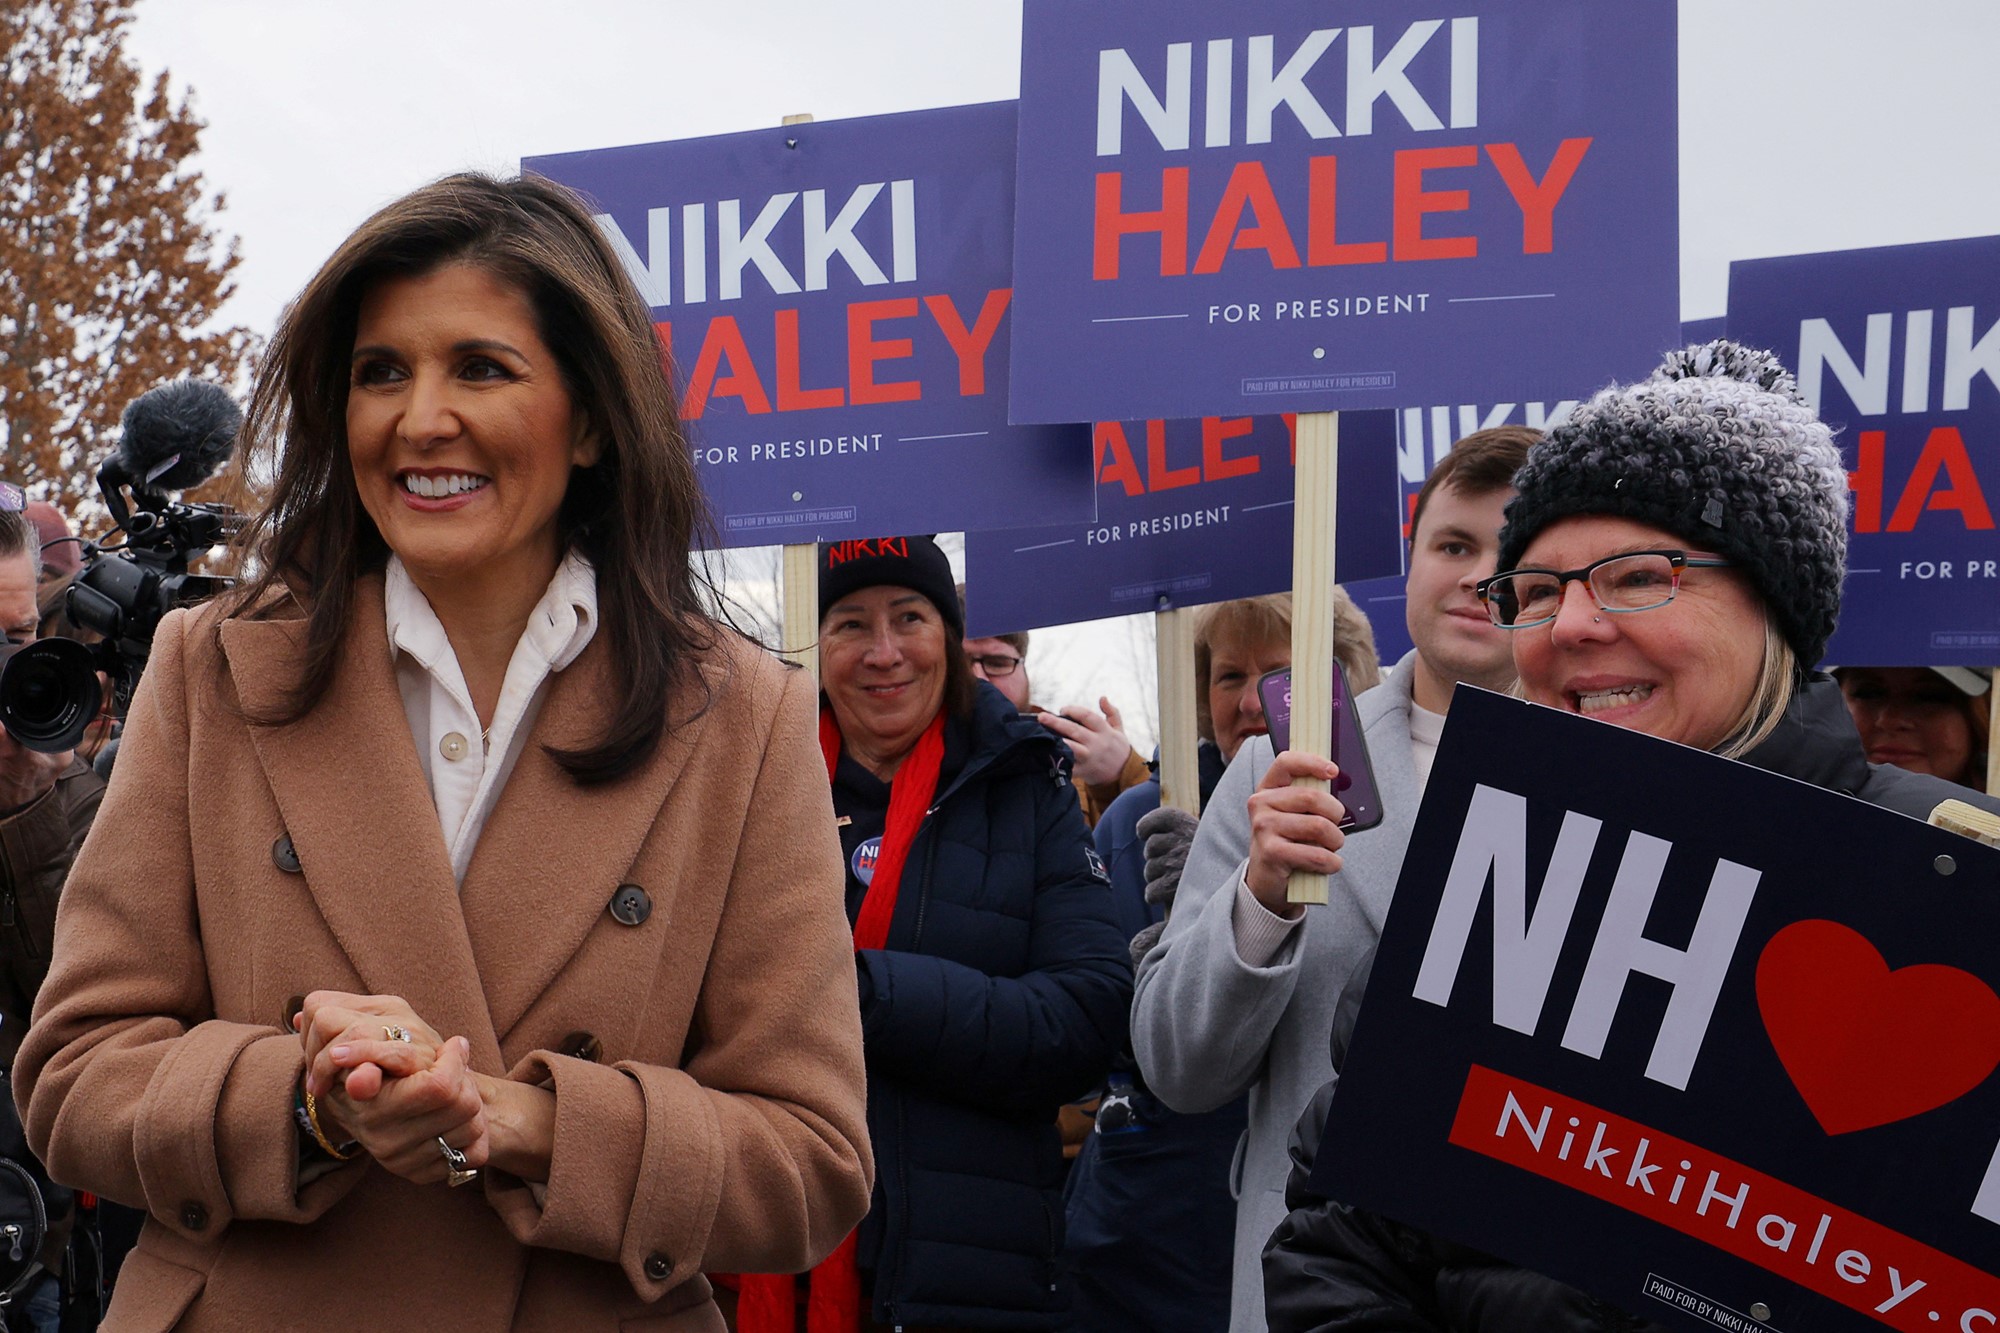 Nikki Haley stands in front of people with signs reading 'Nikki Haley for president.'